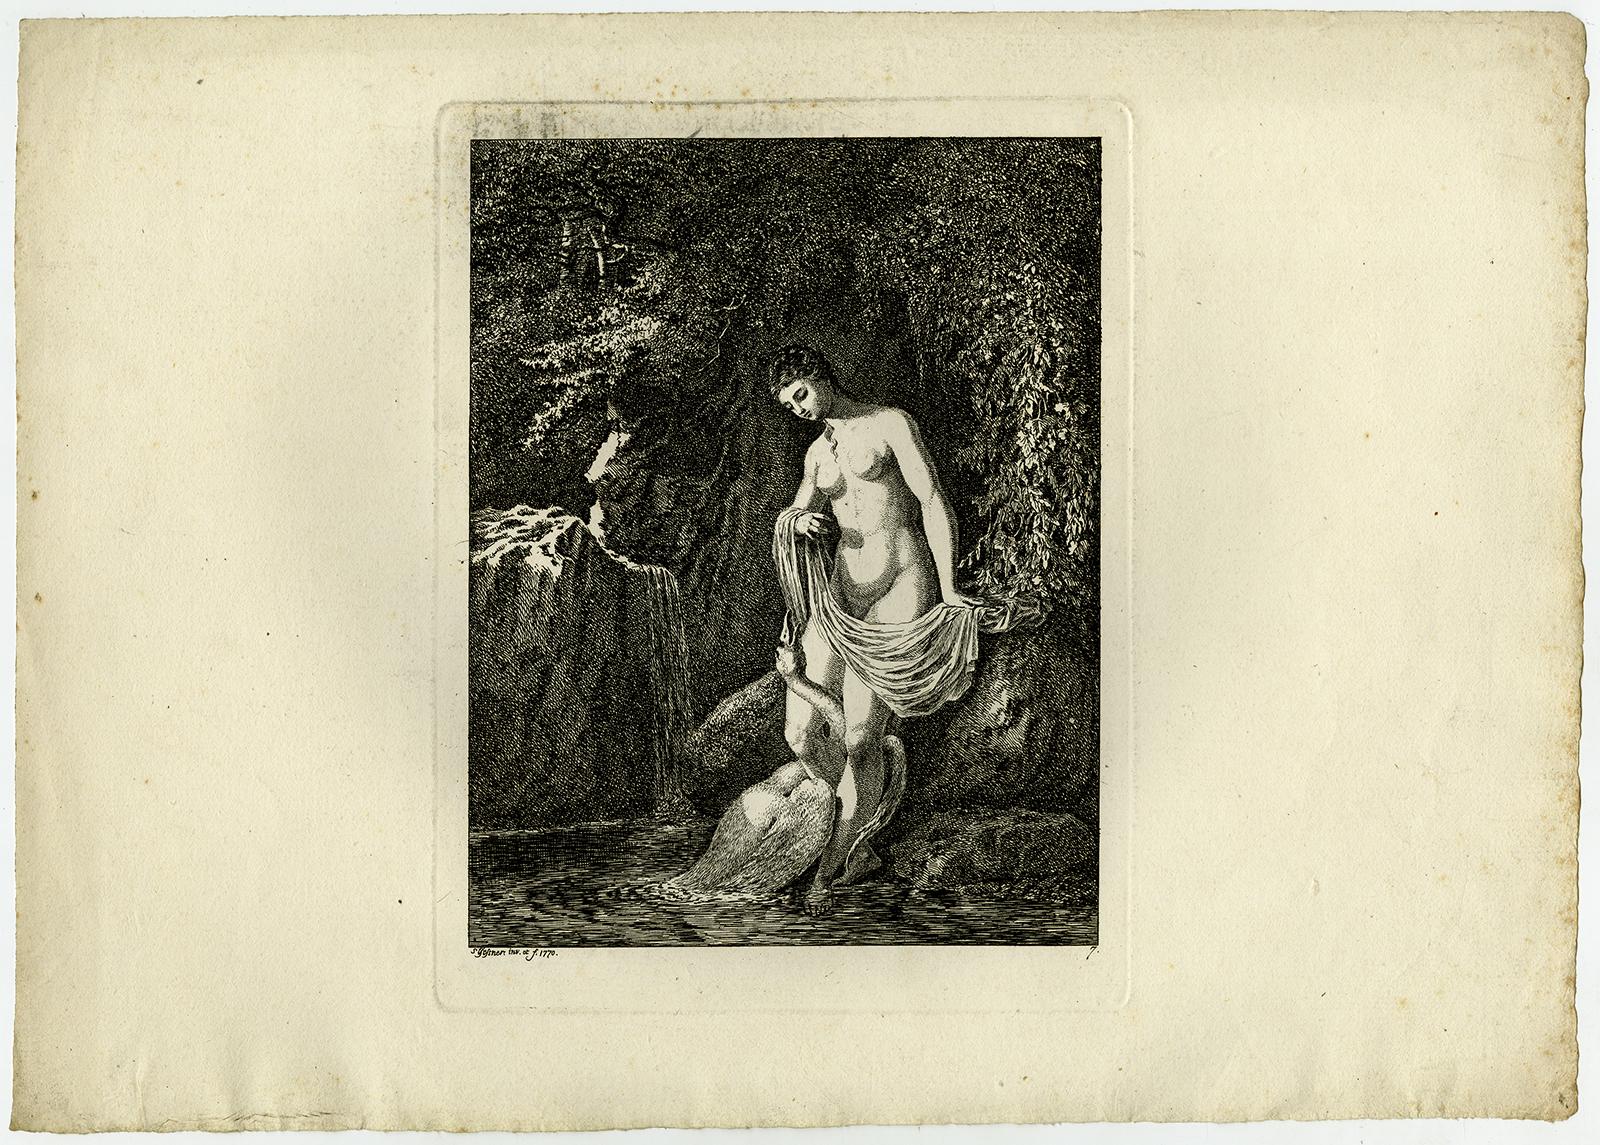 Subject:  Antique Master Print, untitled.  - Landscape with a women bathing near a waterfall with swan.

Description:  From a set with landscapes in the 'antique' taste. . State: Second state of 2. Ref: L/E 29.

Artists and Engravers:  Made by